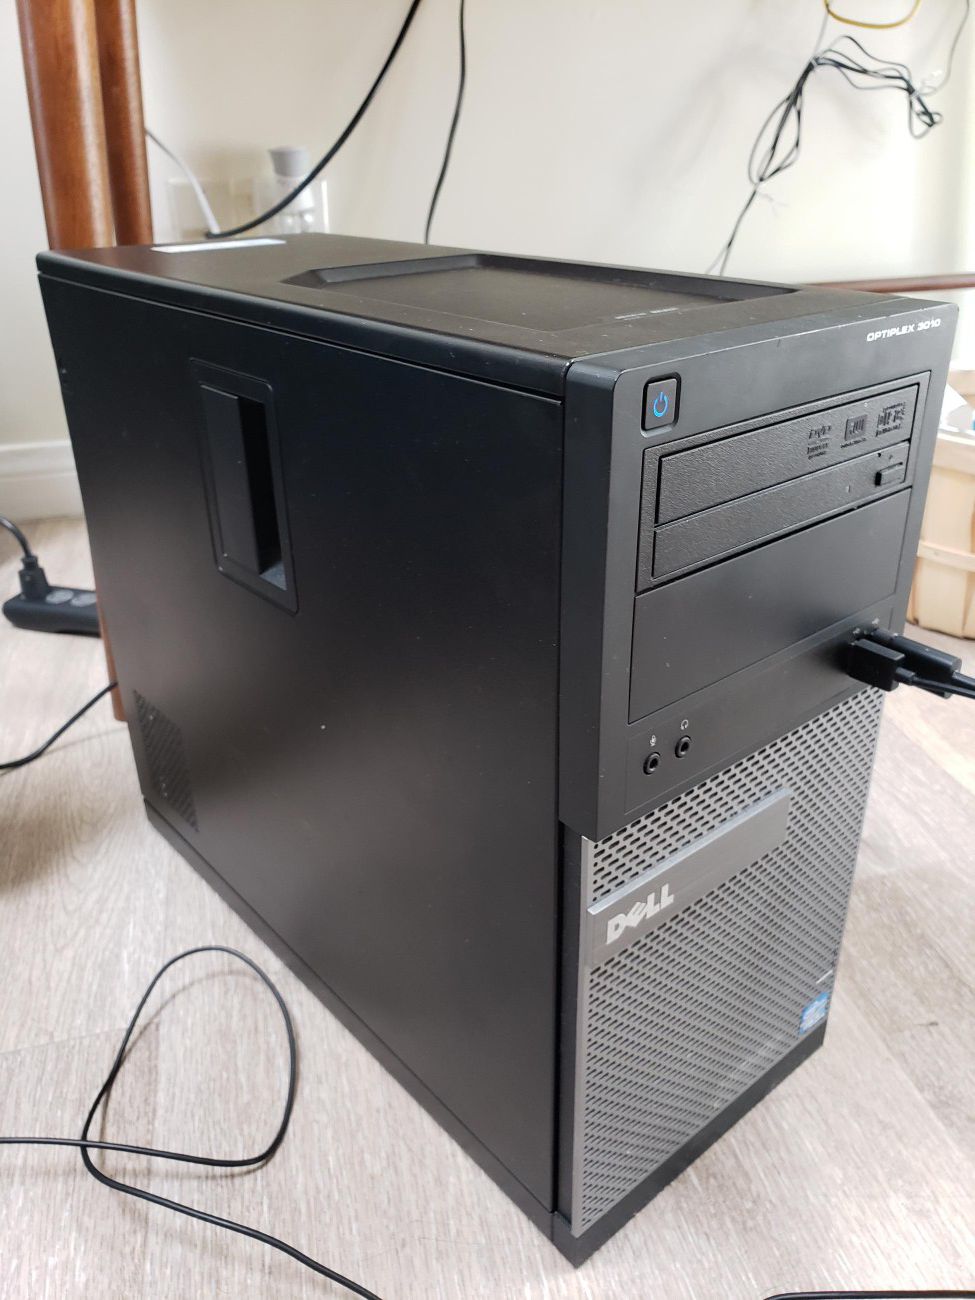 Dell Optiplex 3010 - computer- monitor not included